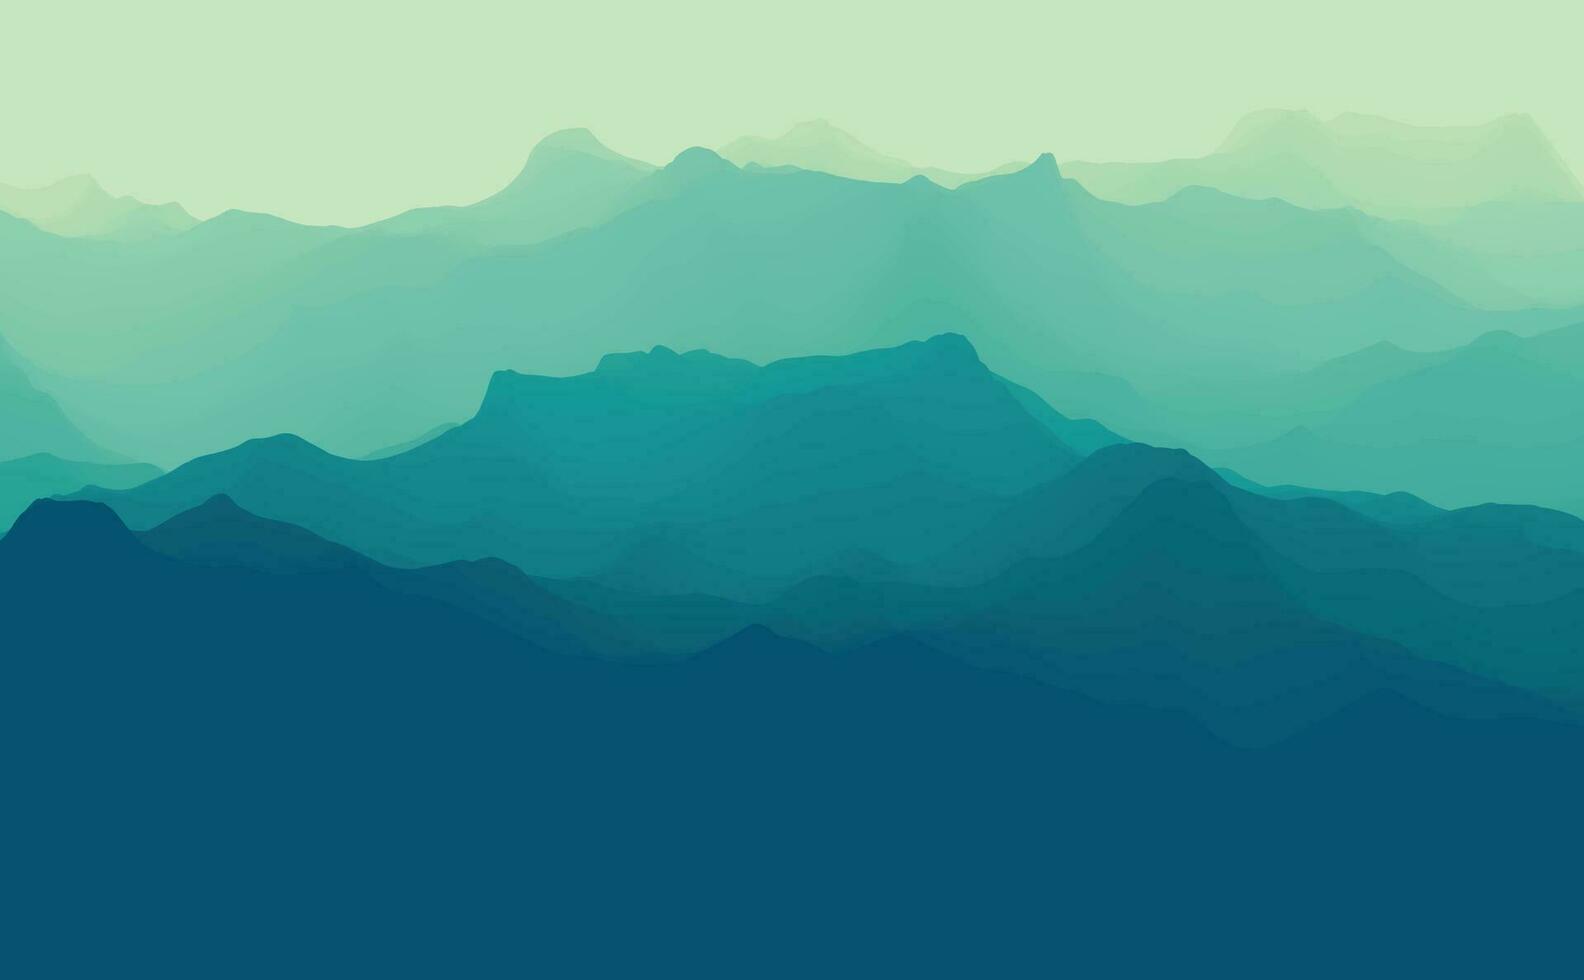 The abstract vector image reforestation in the foreground and different levels of the mountains in the background. Mountain landscape. Forest in the mountains. Untouched nature. Majestic mountains.